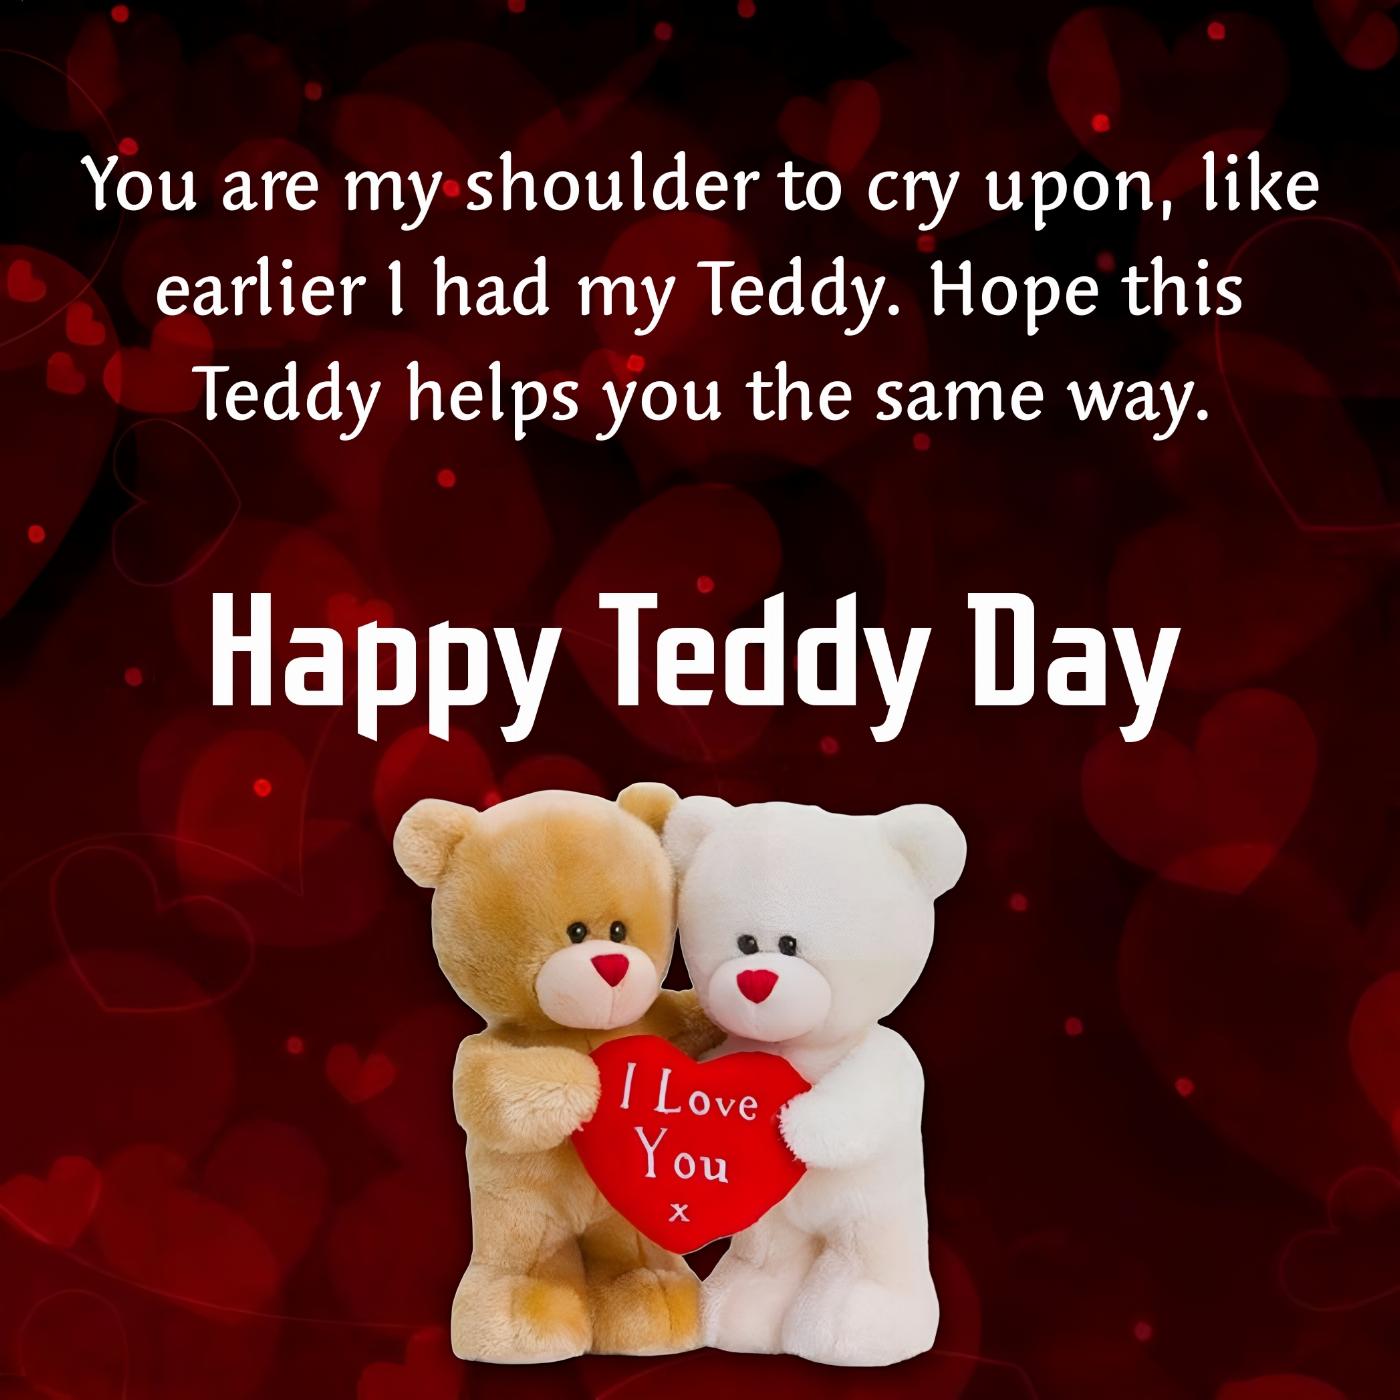 You are my shoulder to cry upon like earlier I had my Teddy